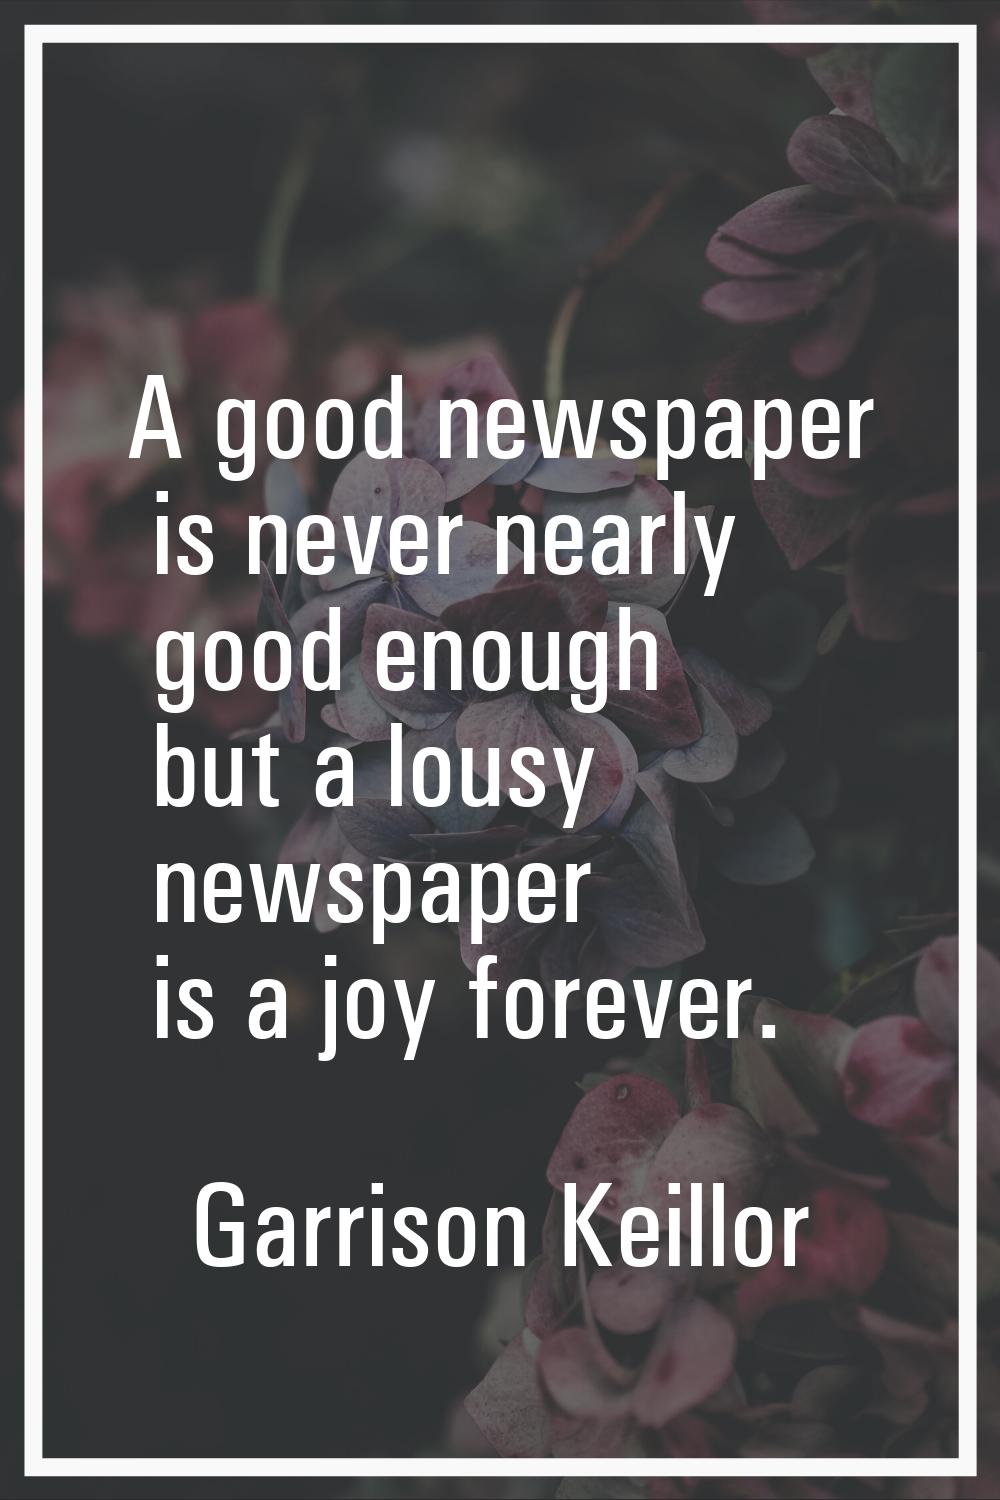 A good newspaper is never nearly good enough but a lousy newspaper is a joy forever.